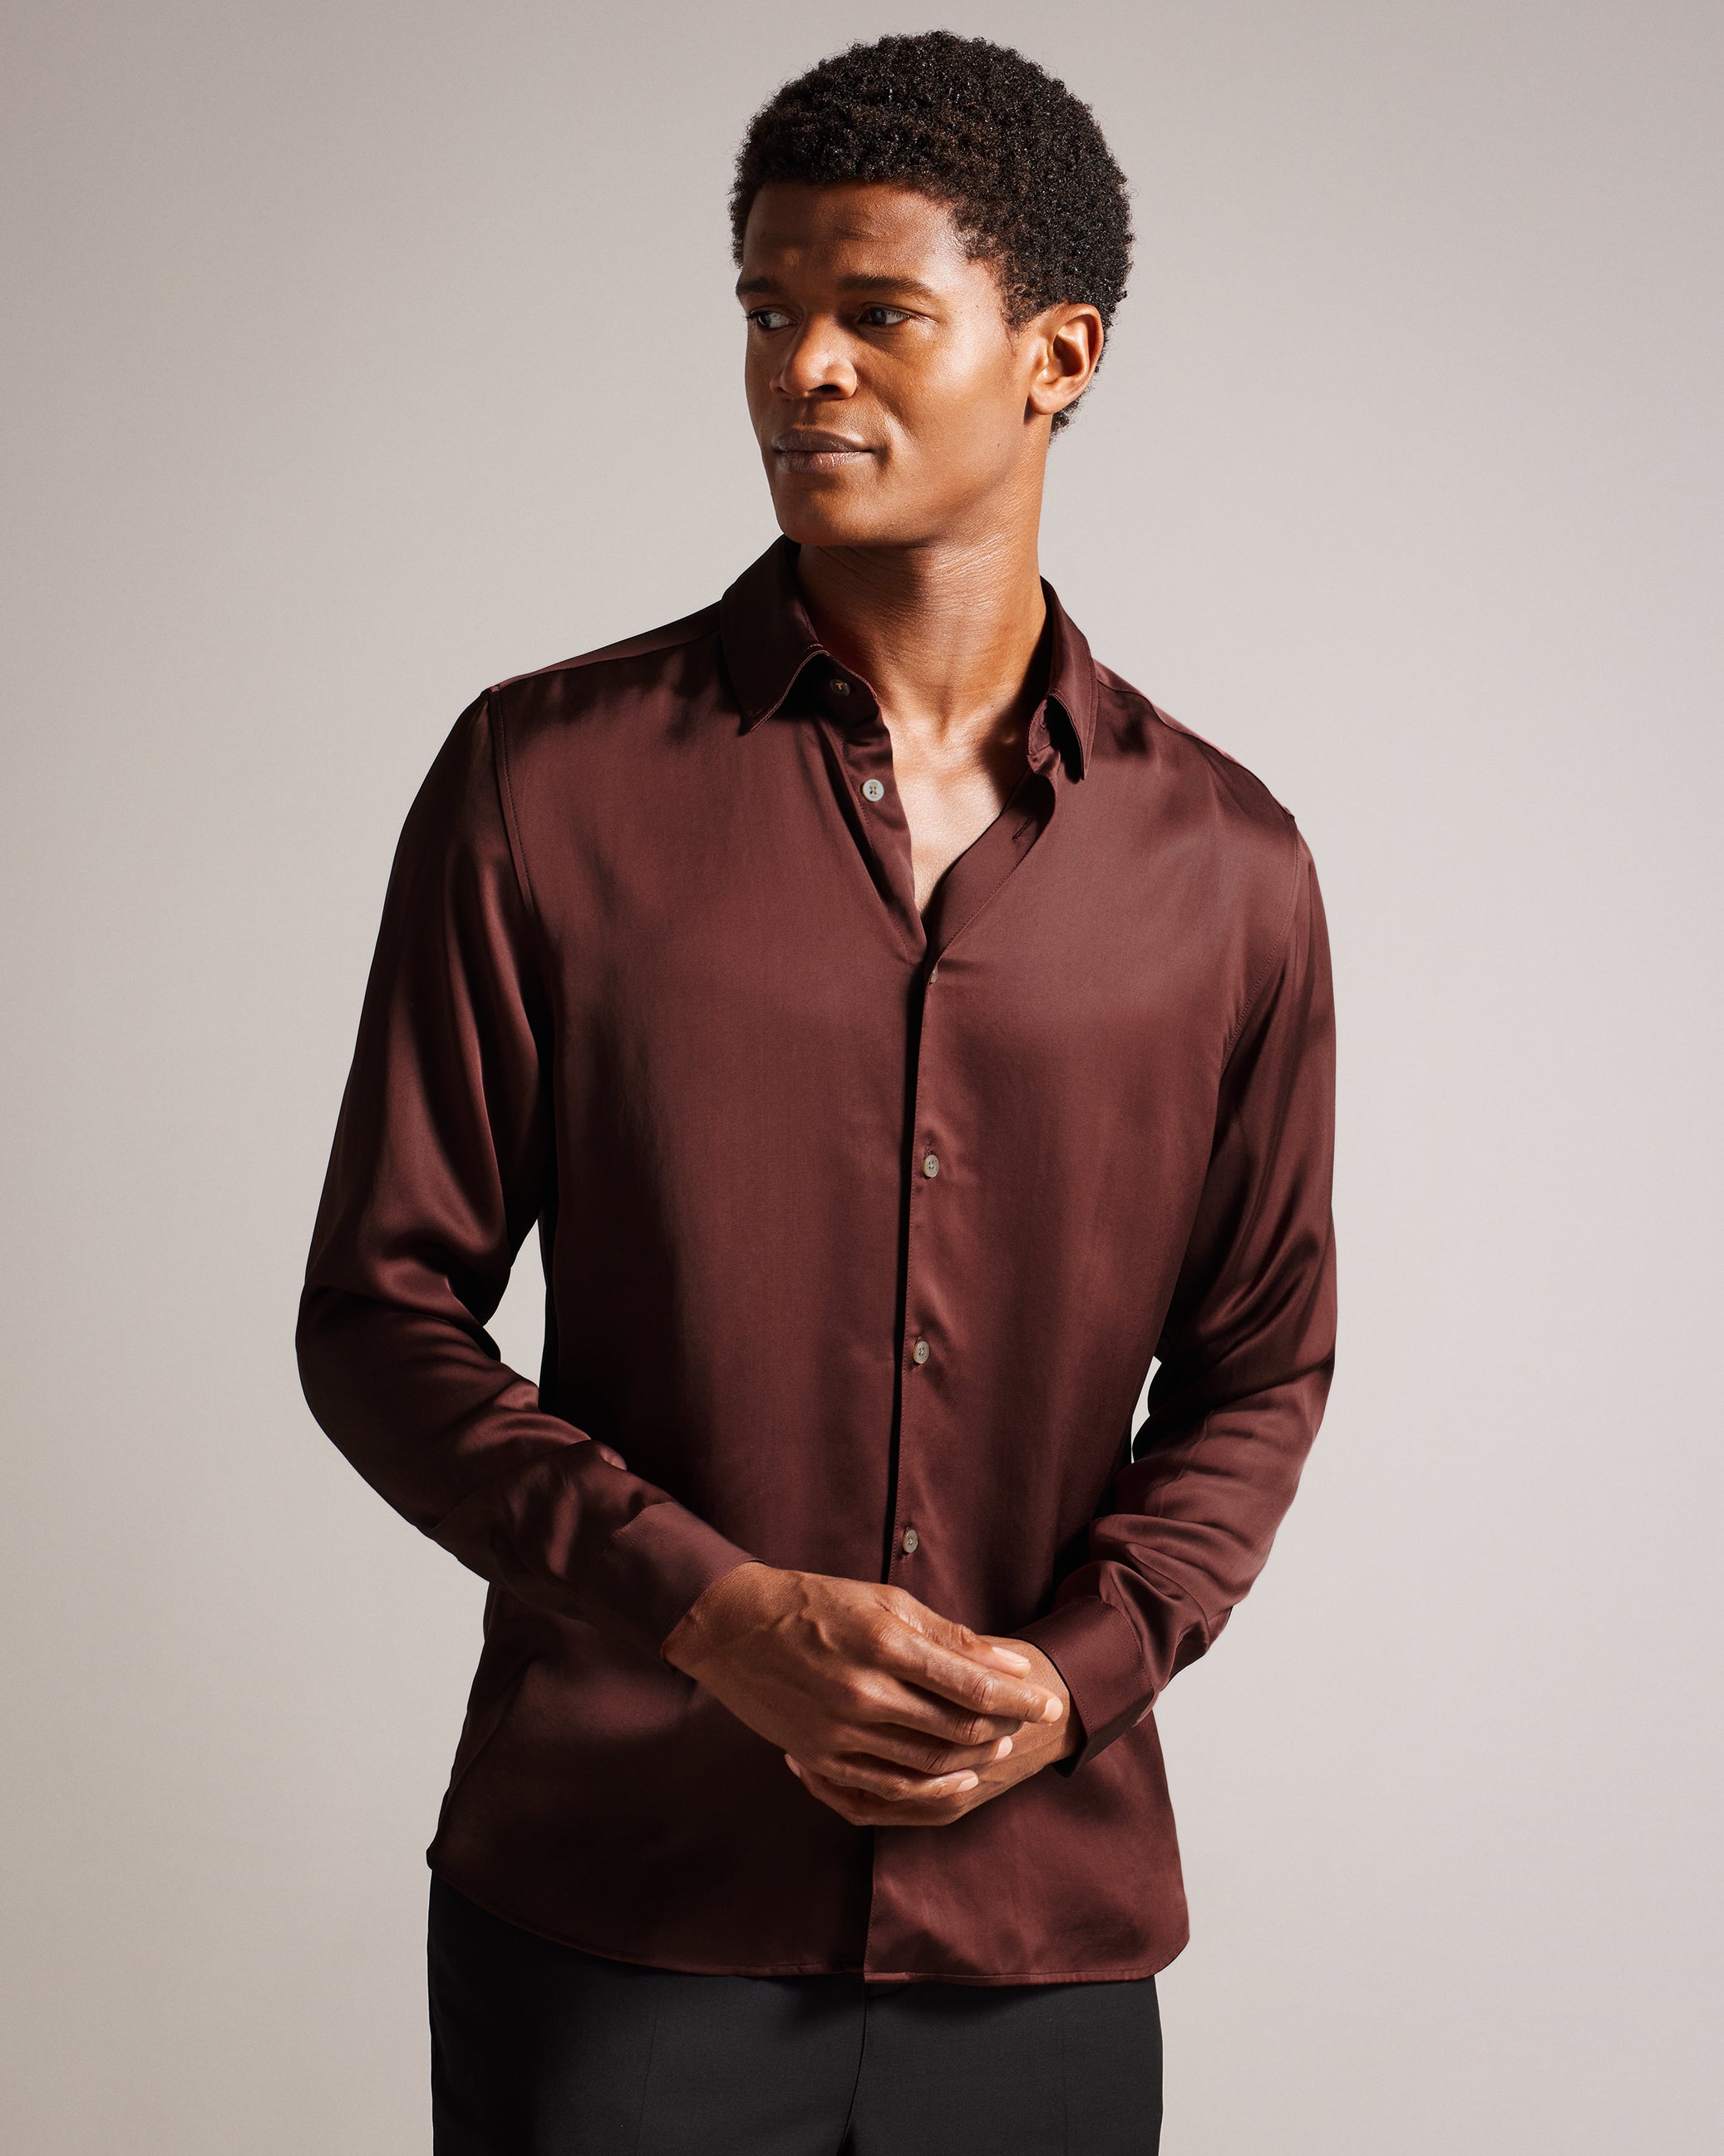 Men's Shirts – Ted Baker, Canada